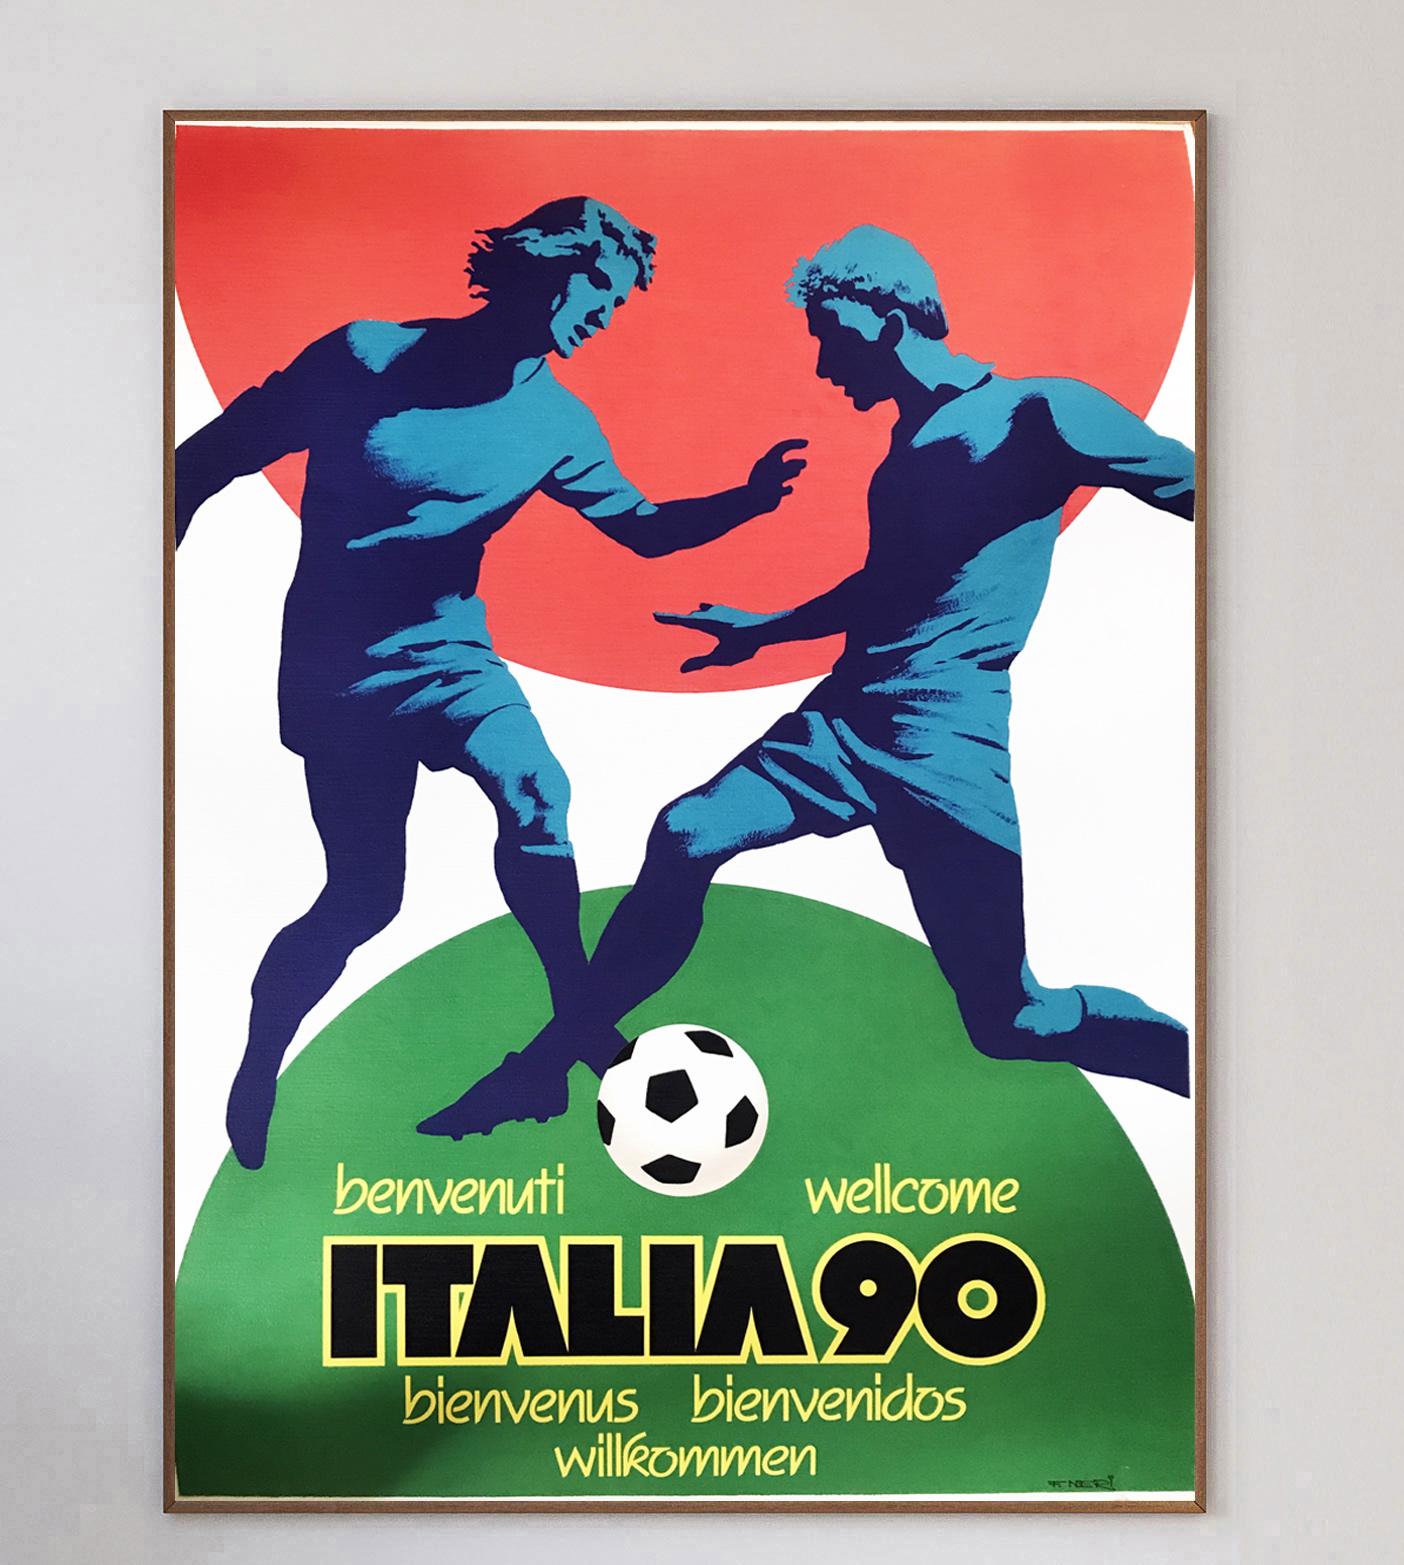 The 1990 FIFA World Cup was the 14th FIFA World Cup, the world championship for men's national association football teams. It was held in Italy from 8th June to 8th July 1990.

The tournament saw iconic moments such as Roger Milla's dancing, Gazza's